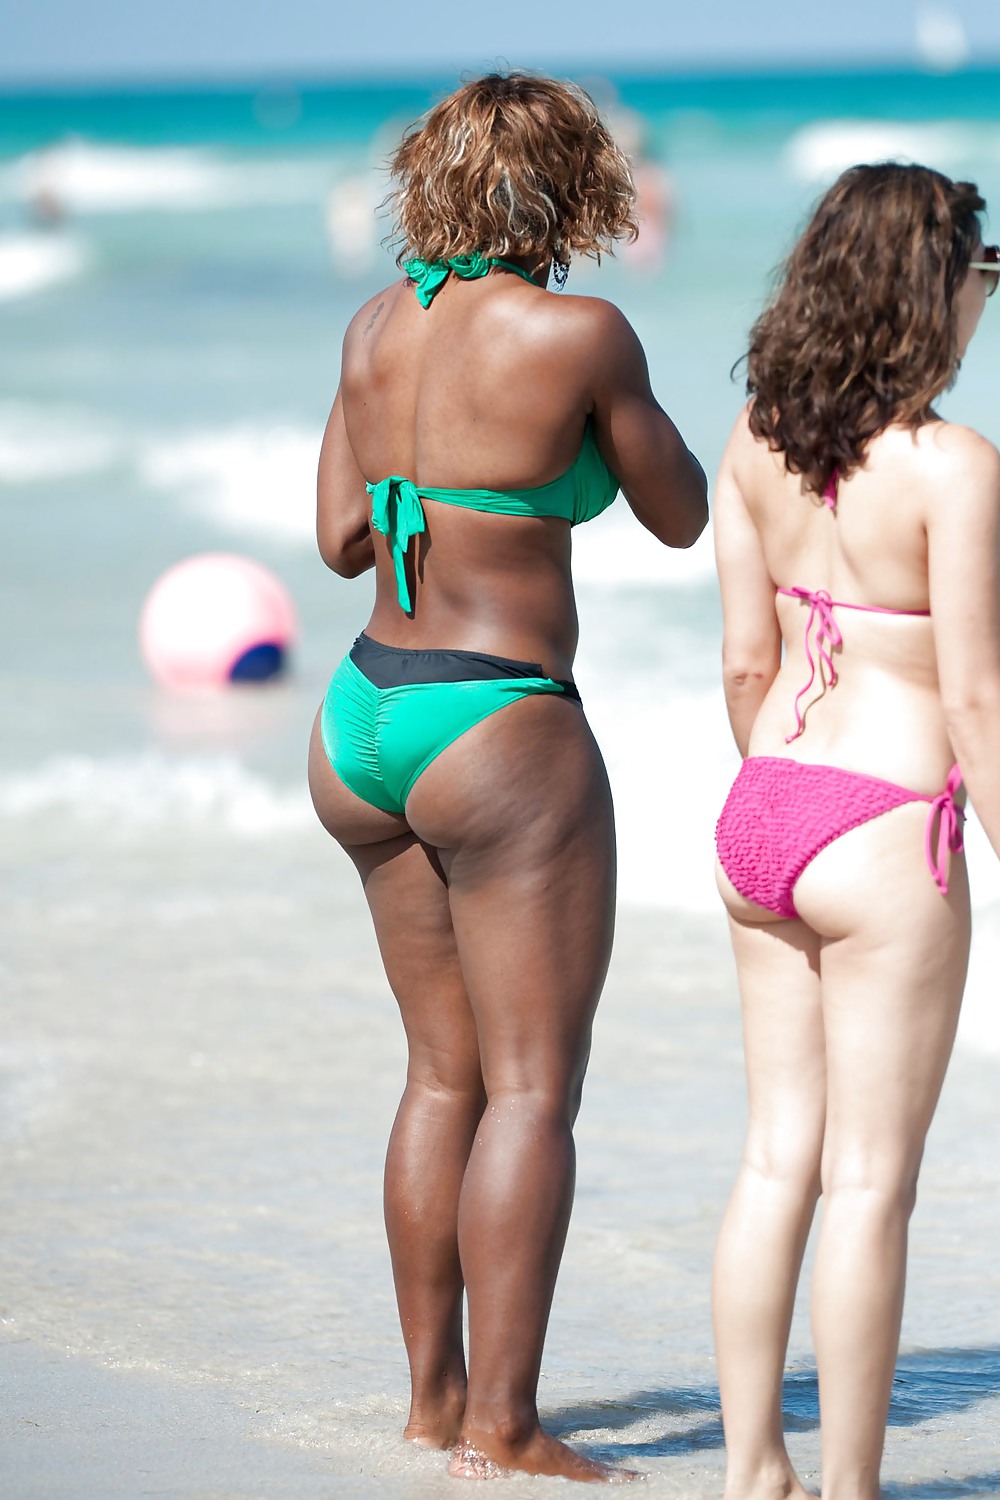 Serena Williams hot candids | The Hottes